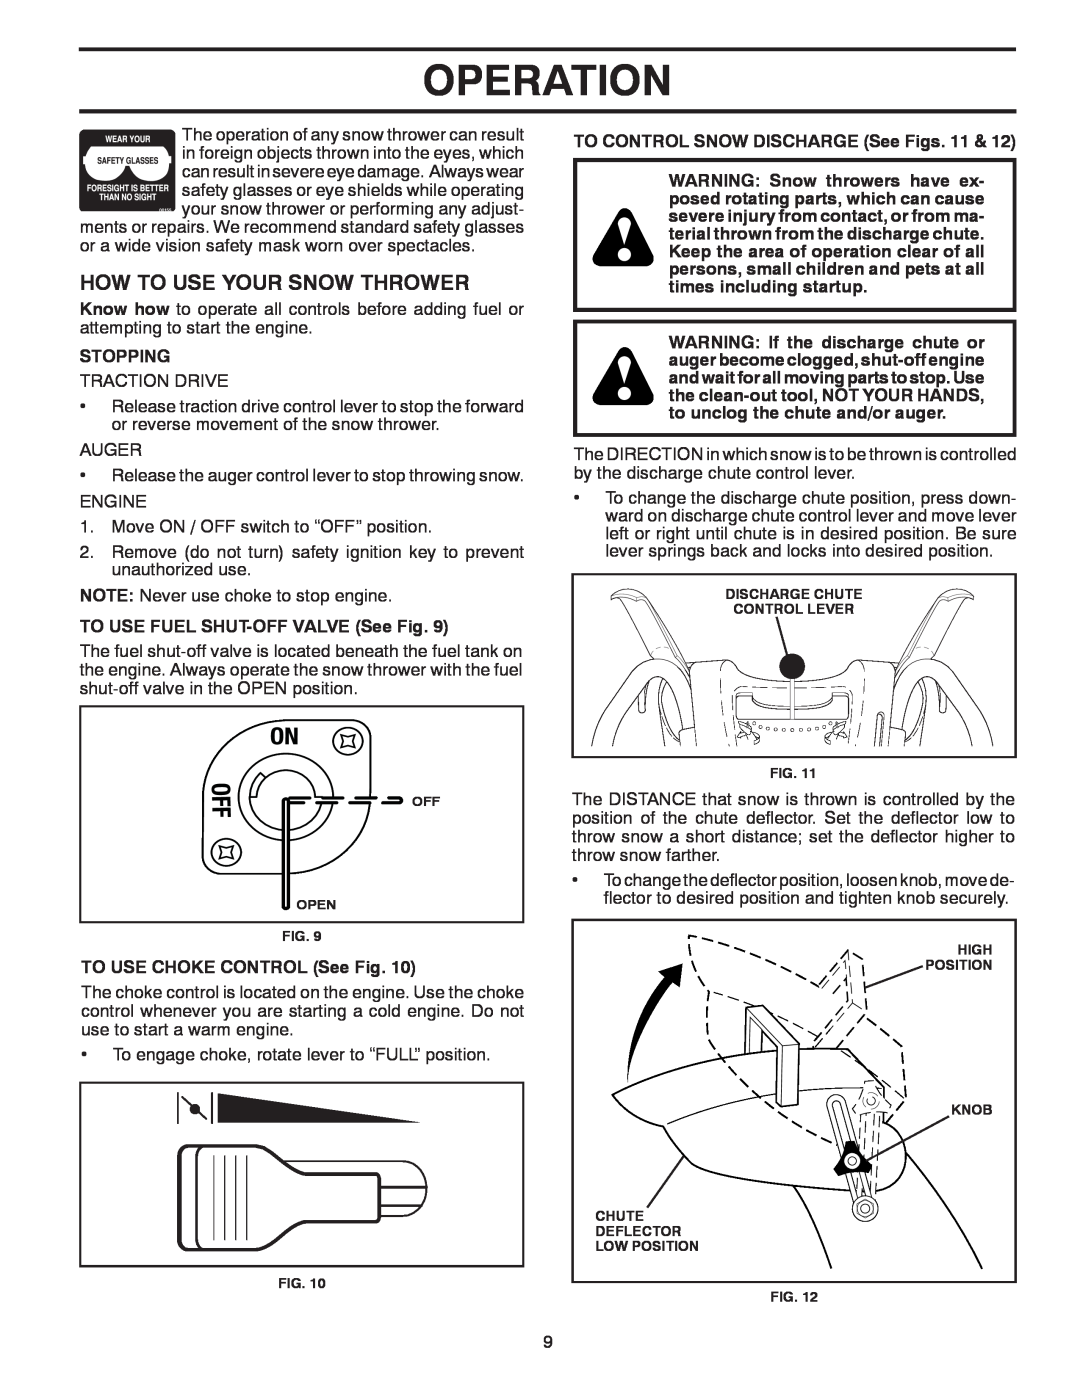 Poulan 96192004501, 437920 How To Use Your Snow Thrower, Operation, Stopping, TO USE FUEL SHUT-OFF VALVE See Fig 